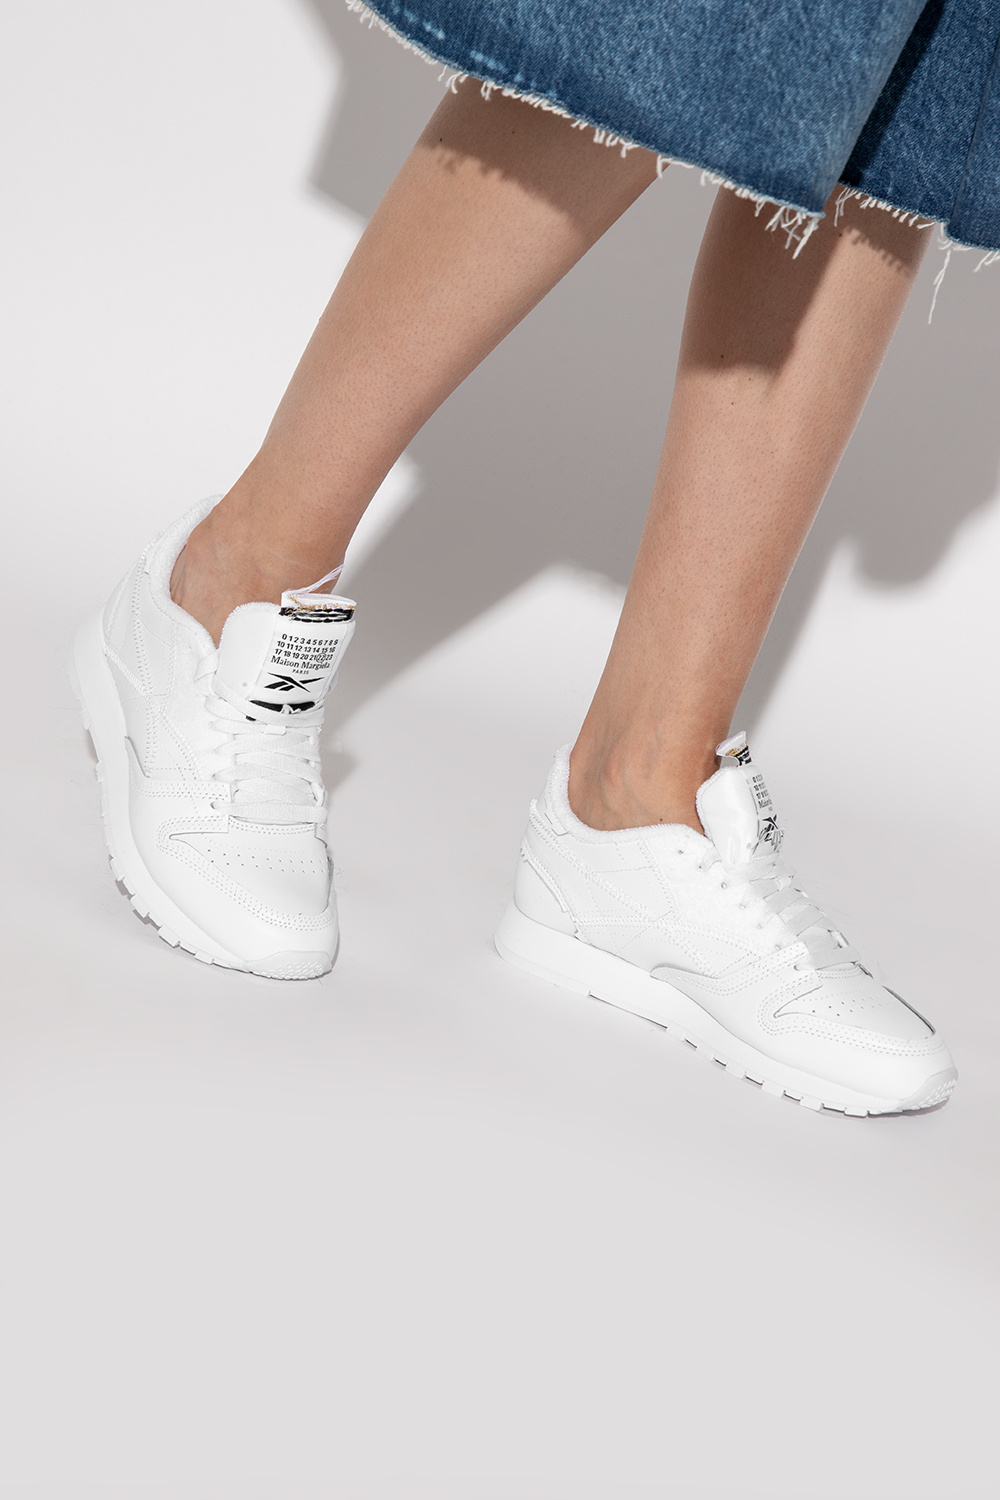 The shoe heel is widen - White 'PROJECT 0 CL MEMORY OF' sneakers